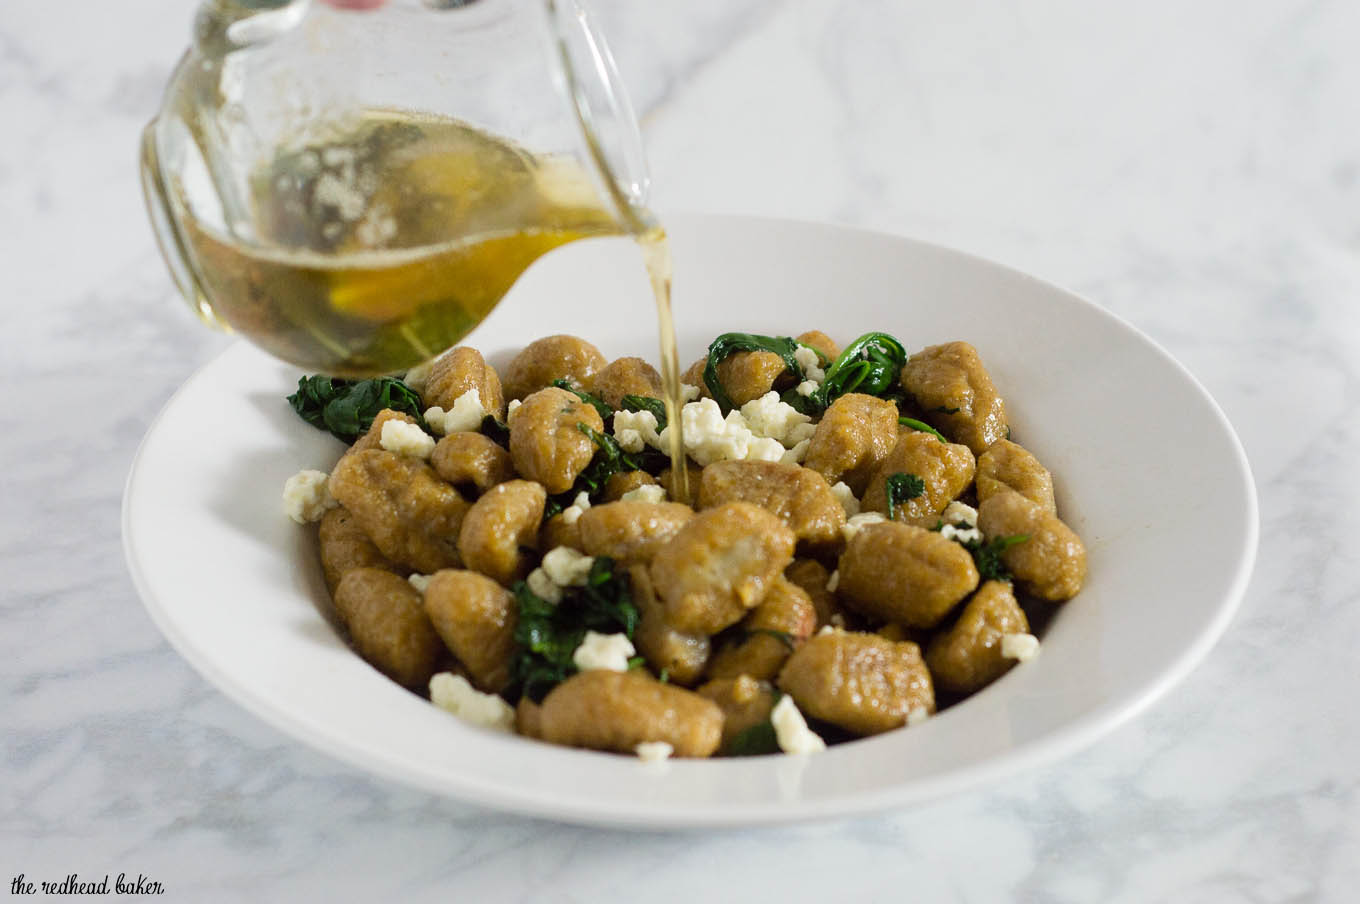 Pumpkin gnocchi and spinach with sage brown butter sauce is a hearty vegetarian meal full of flavor. You won't miss the meat! #SundaySupper